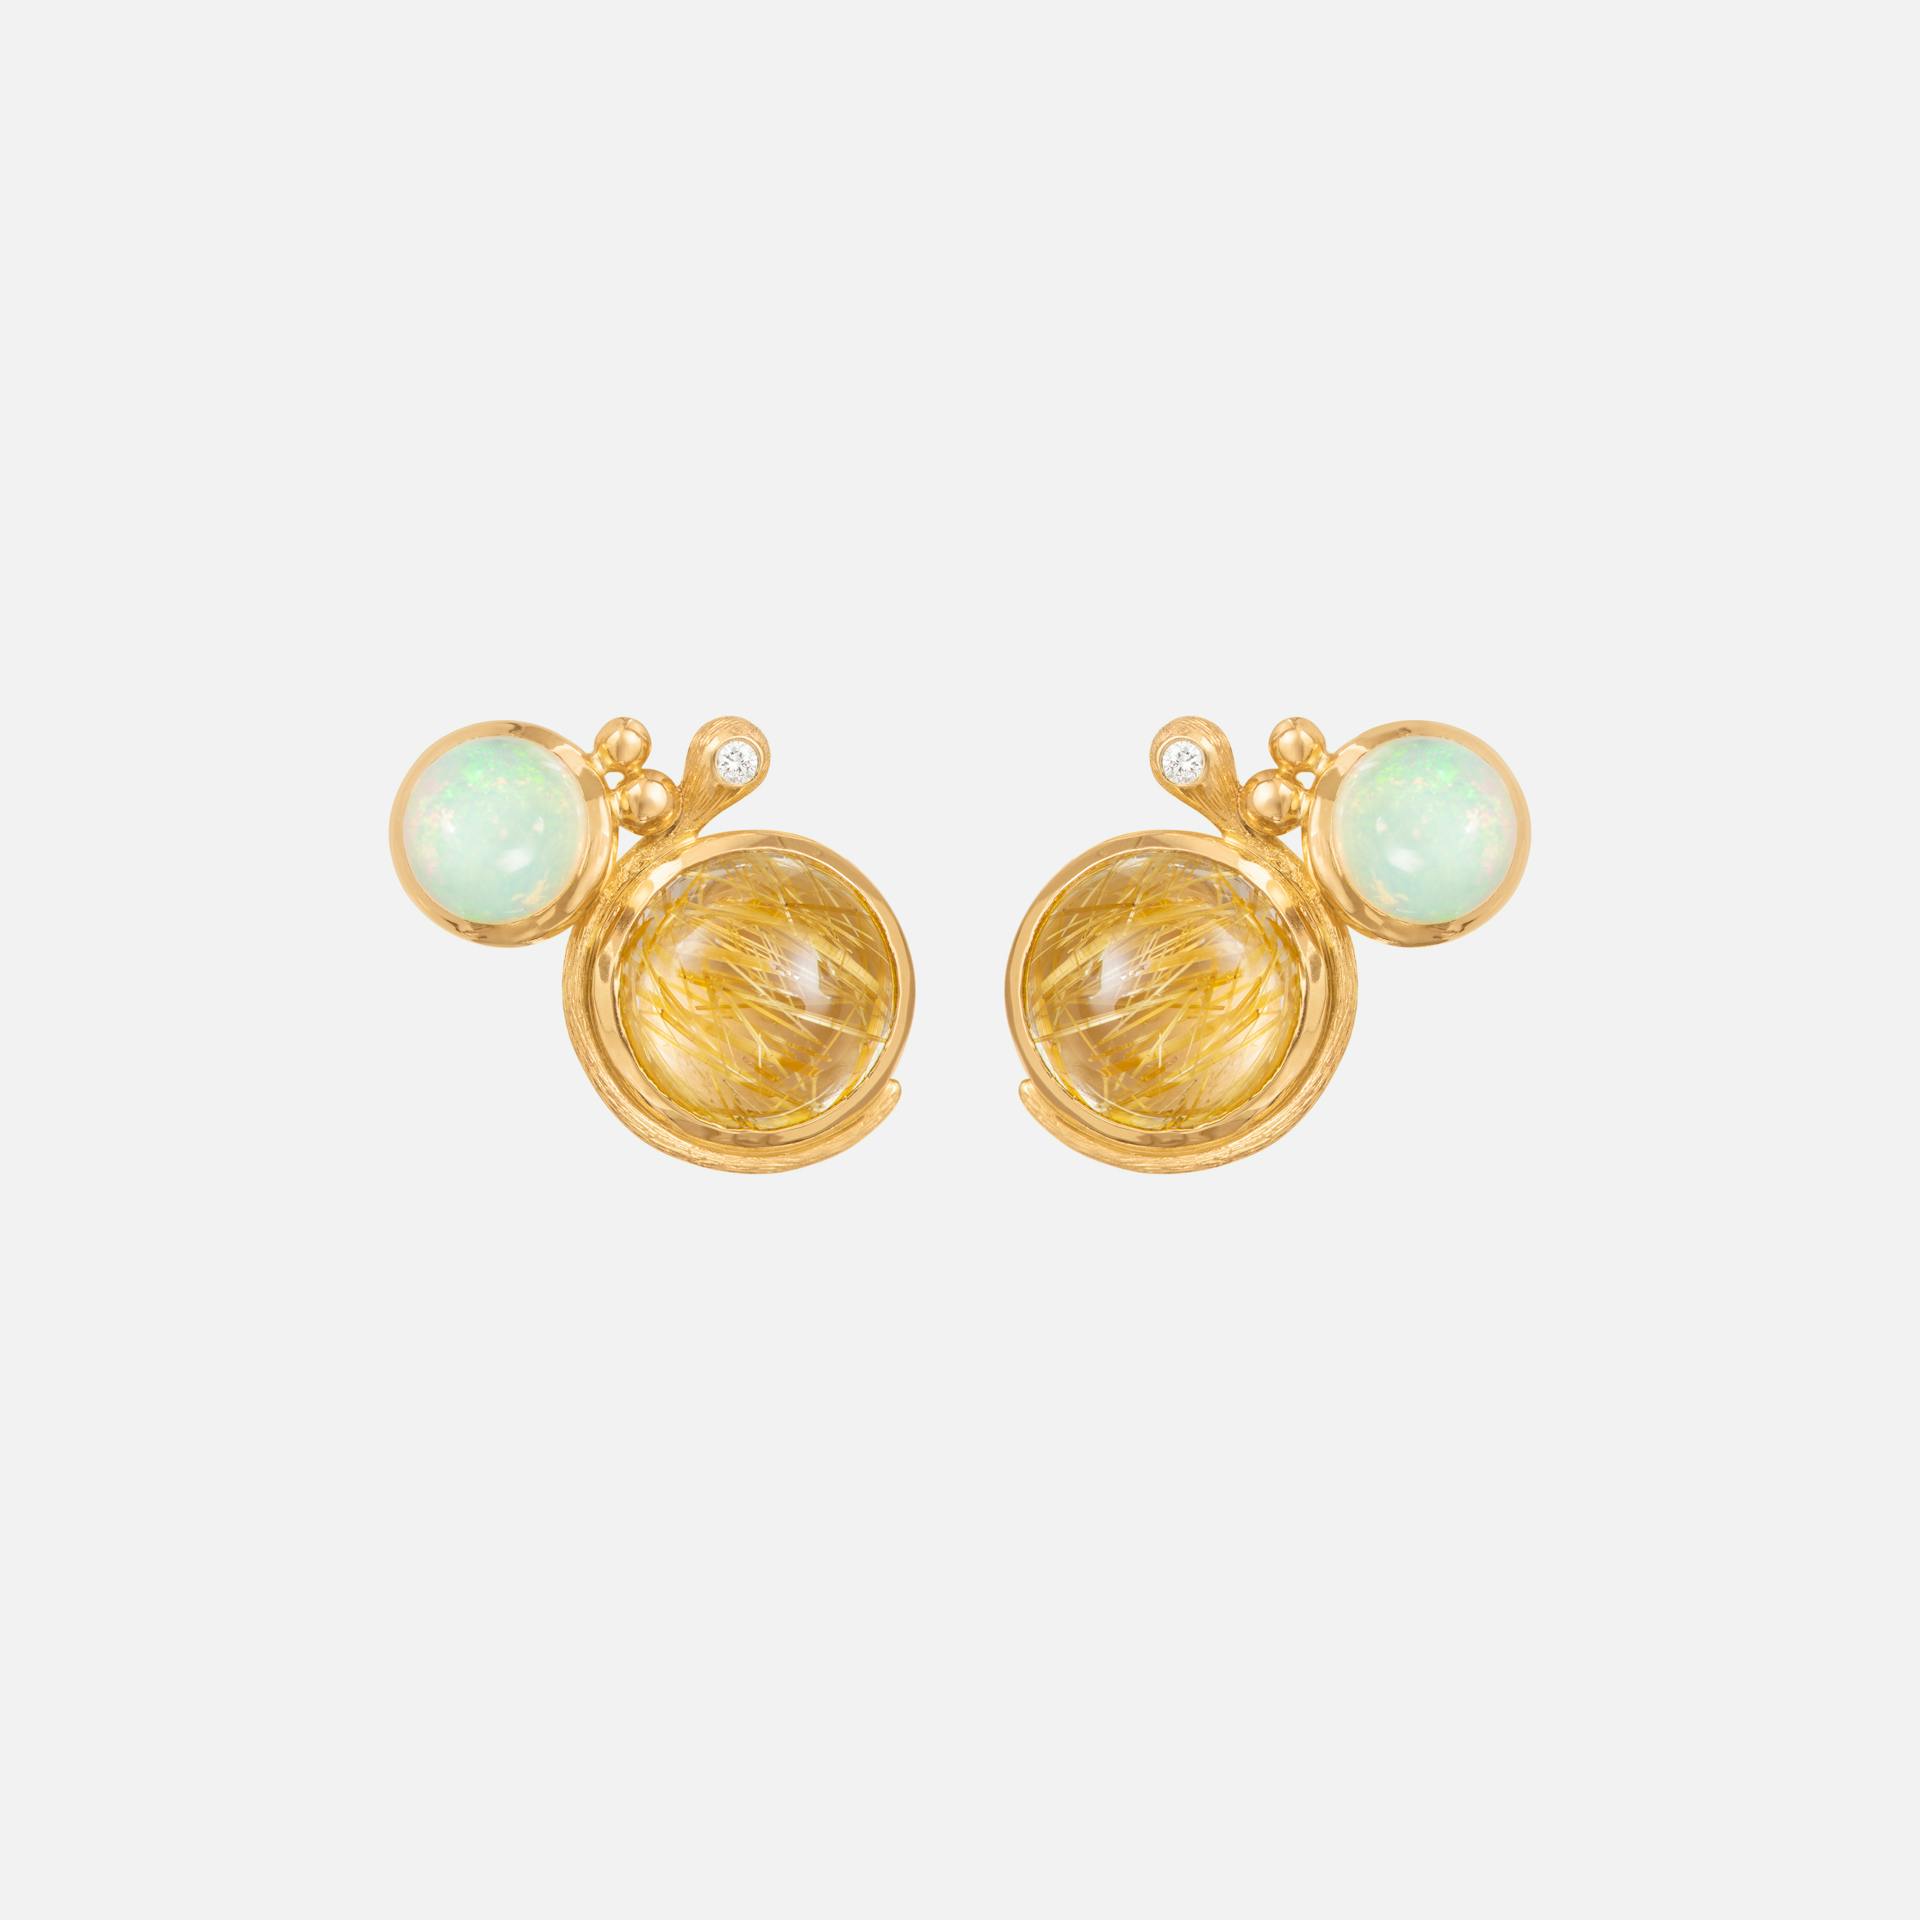 Lotus stud earrings 18k gold with opal and rutile quartz